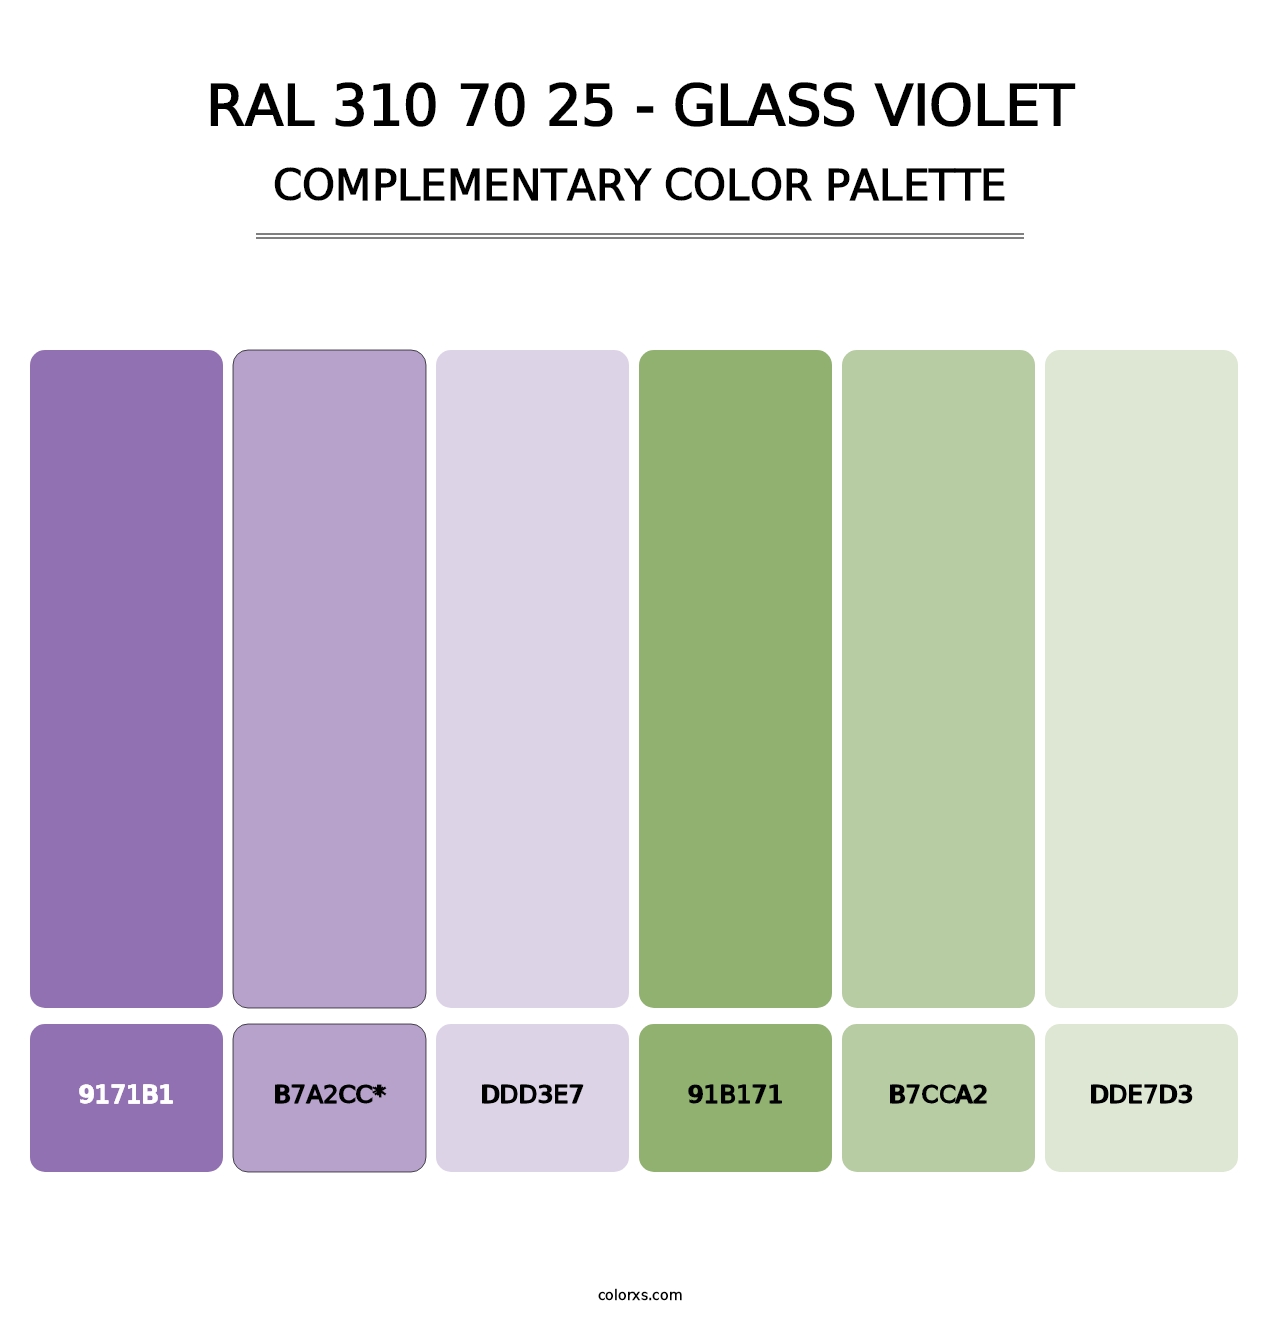 RAL 310 70 25 - Glass Violet - Complementary Color Palette